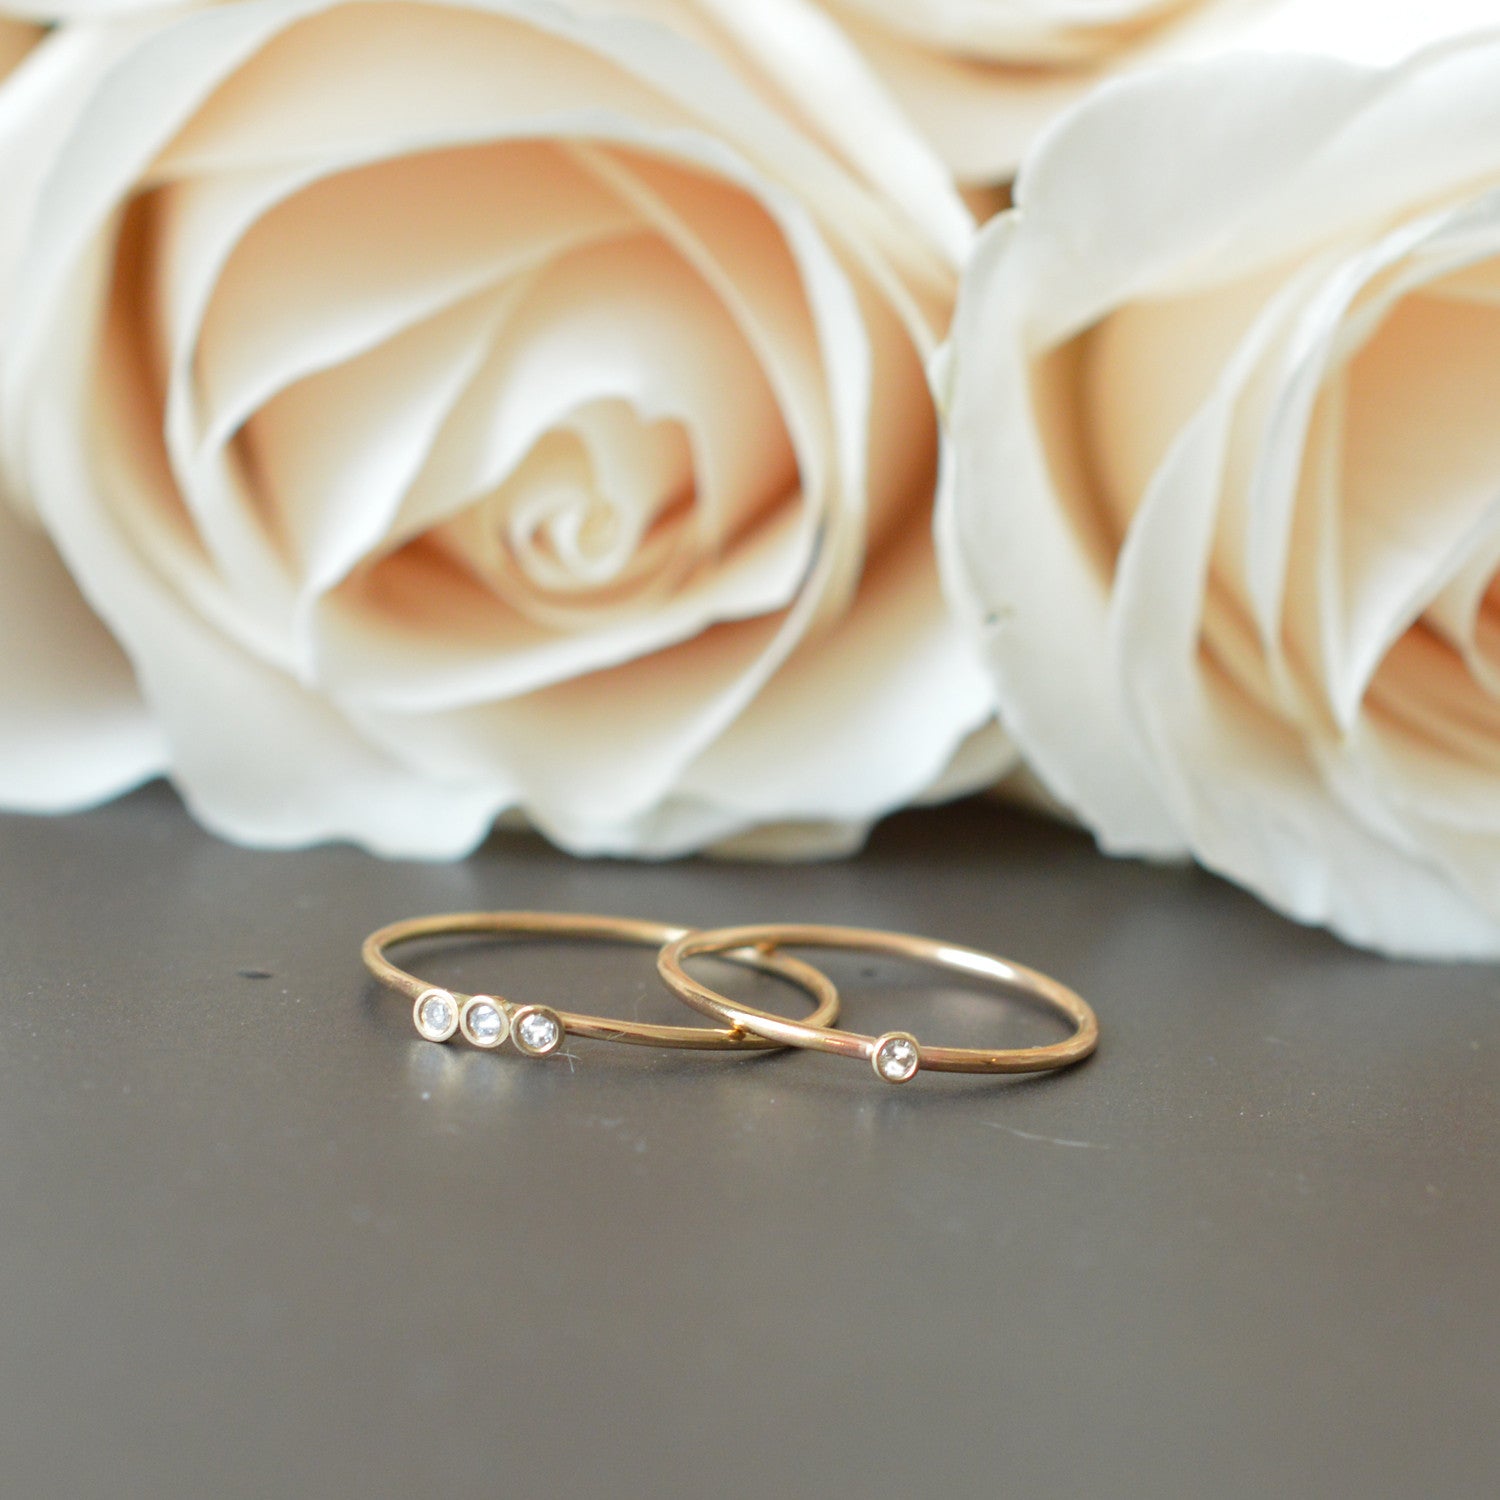 10 Piece Dainty Gold Ring Set, Simple Gold Rings, Delicate Gold Rings,  Minimalist Gold Rings, Pretty Gold Rings, Jewelry Gift Set 